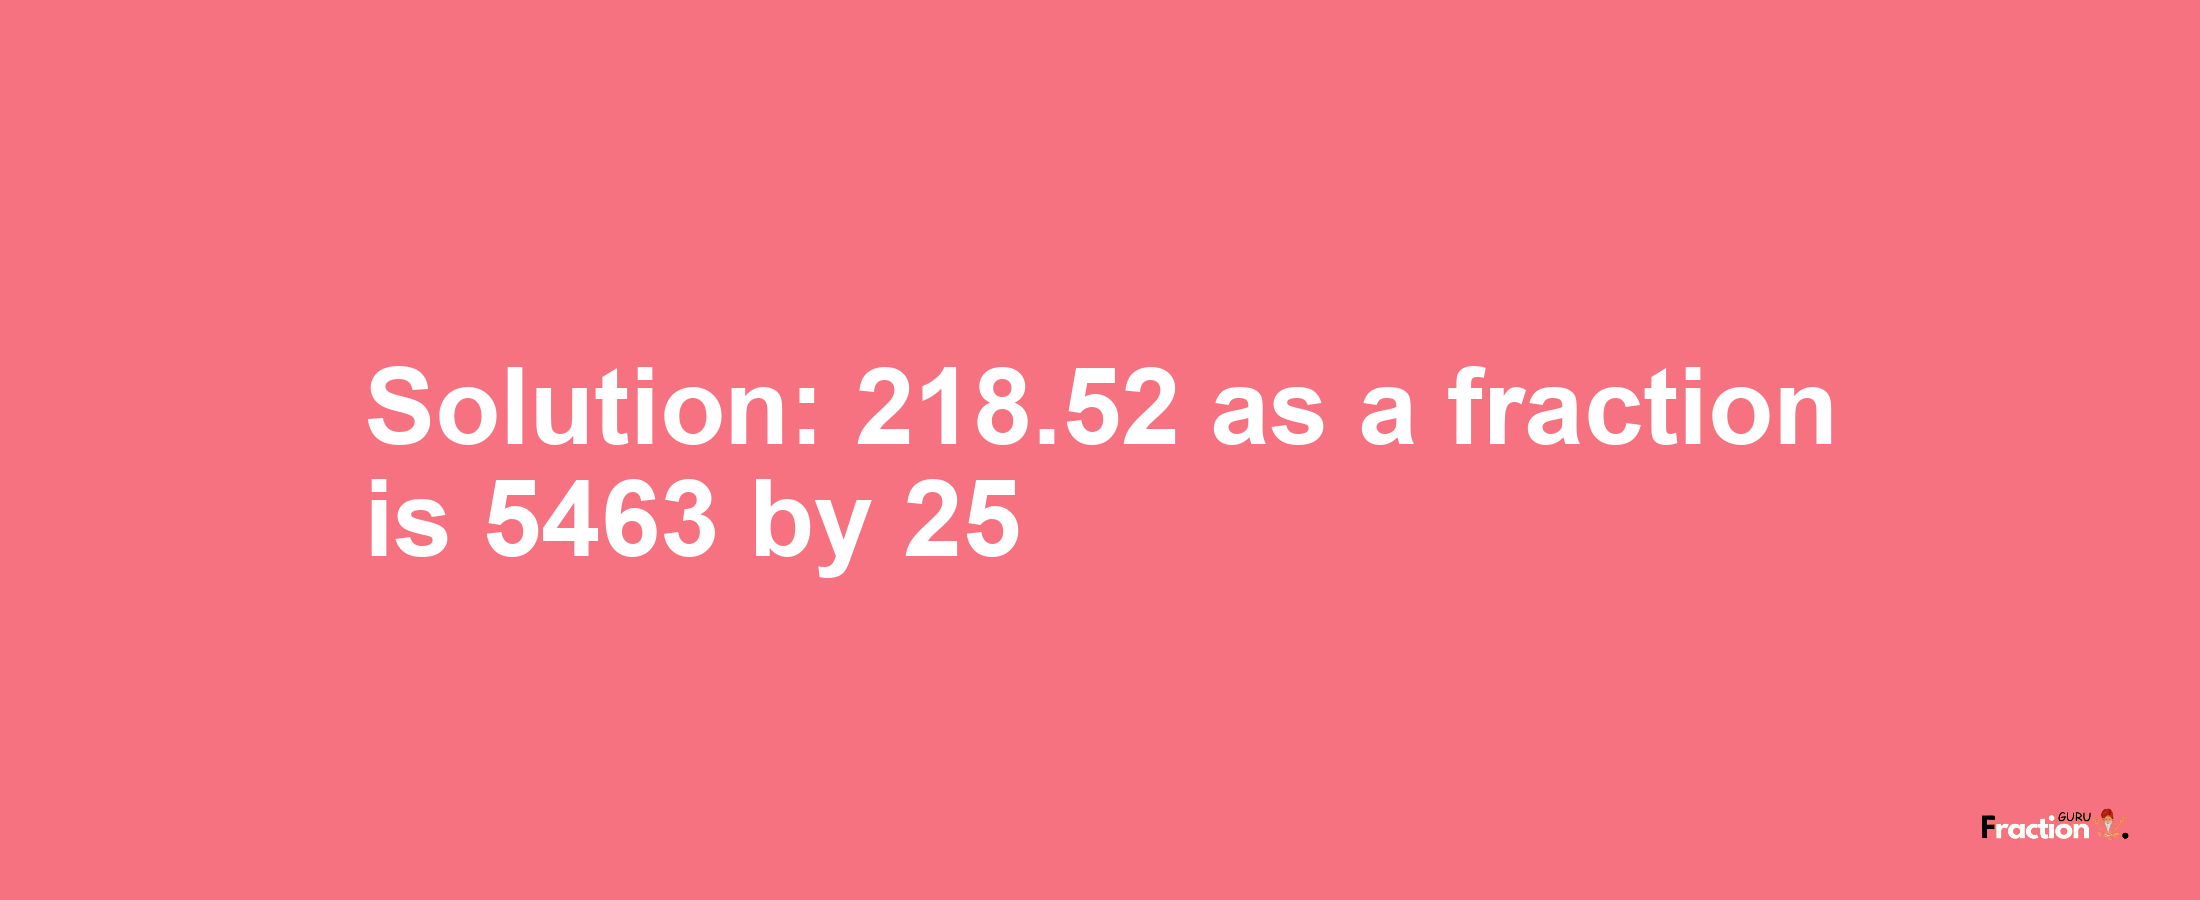 Solution:218.52 as a fraction is 5463/25